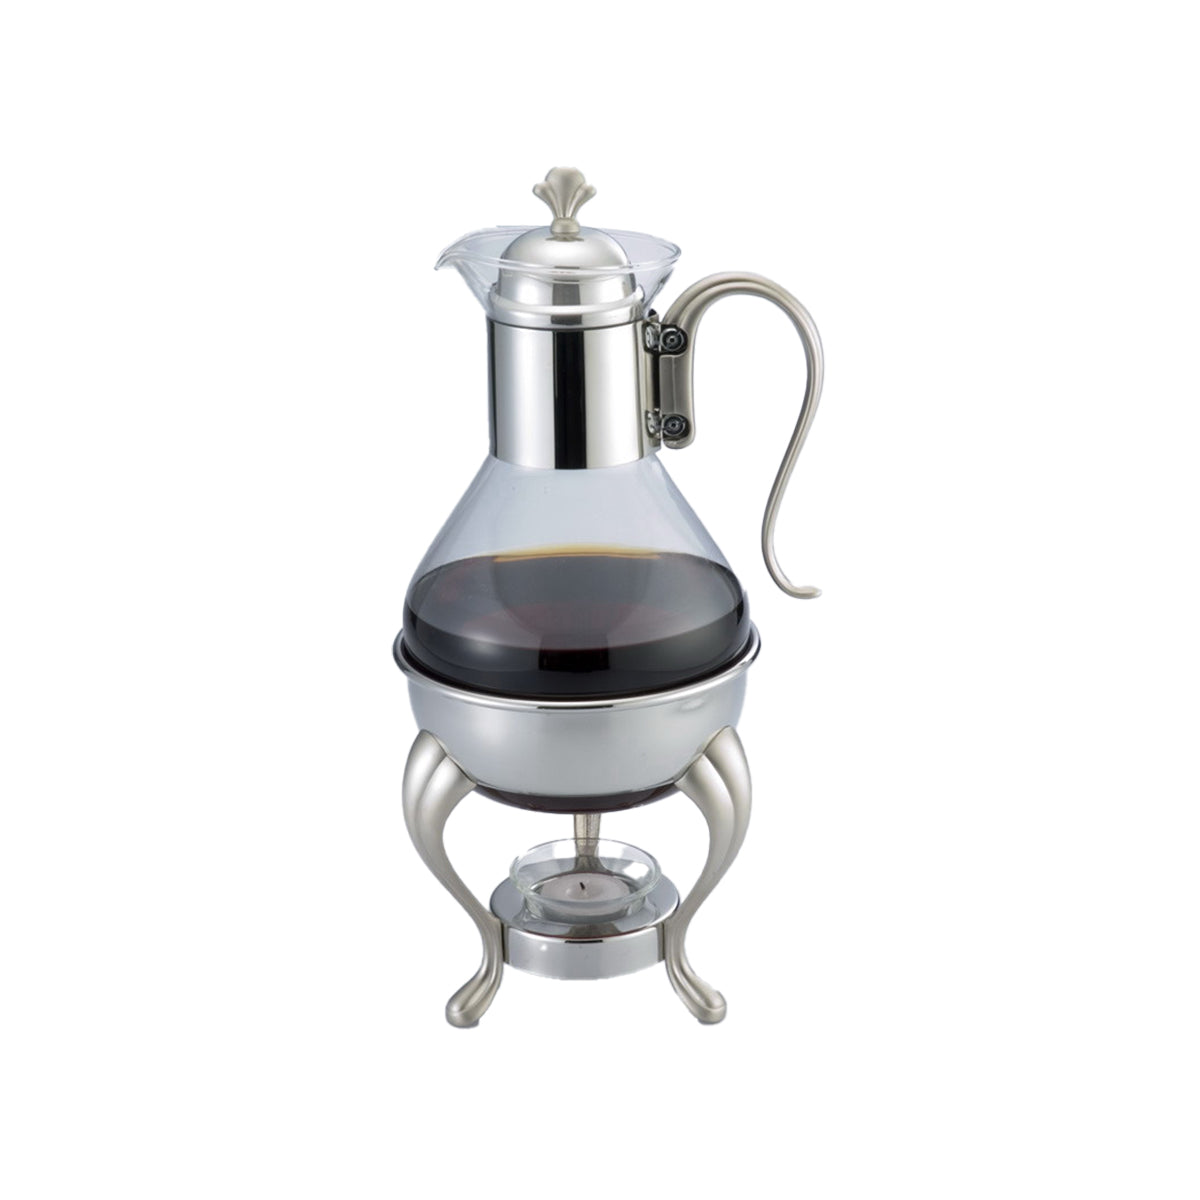 Coffee Warmer with Candle -750 ml -Stainless Steel